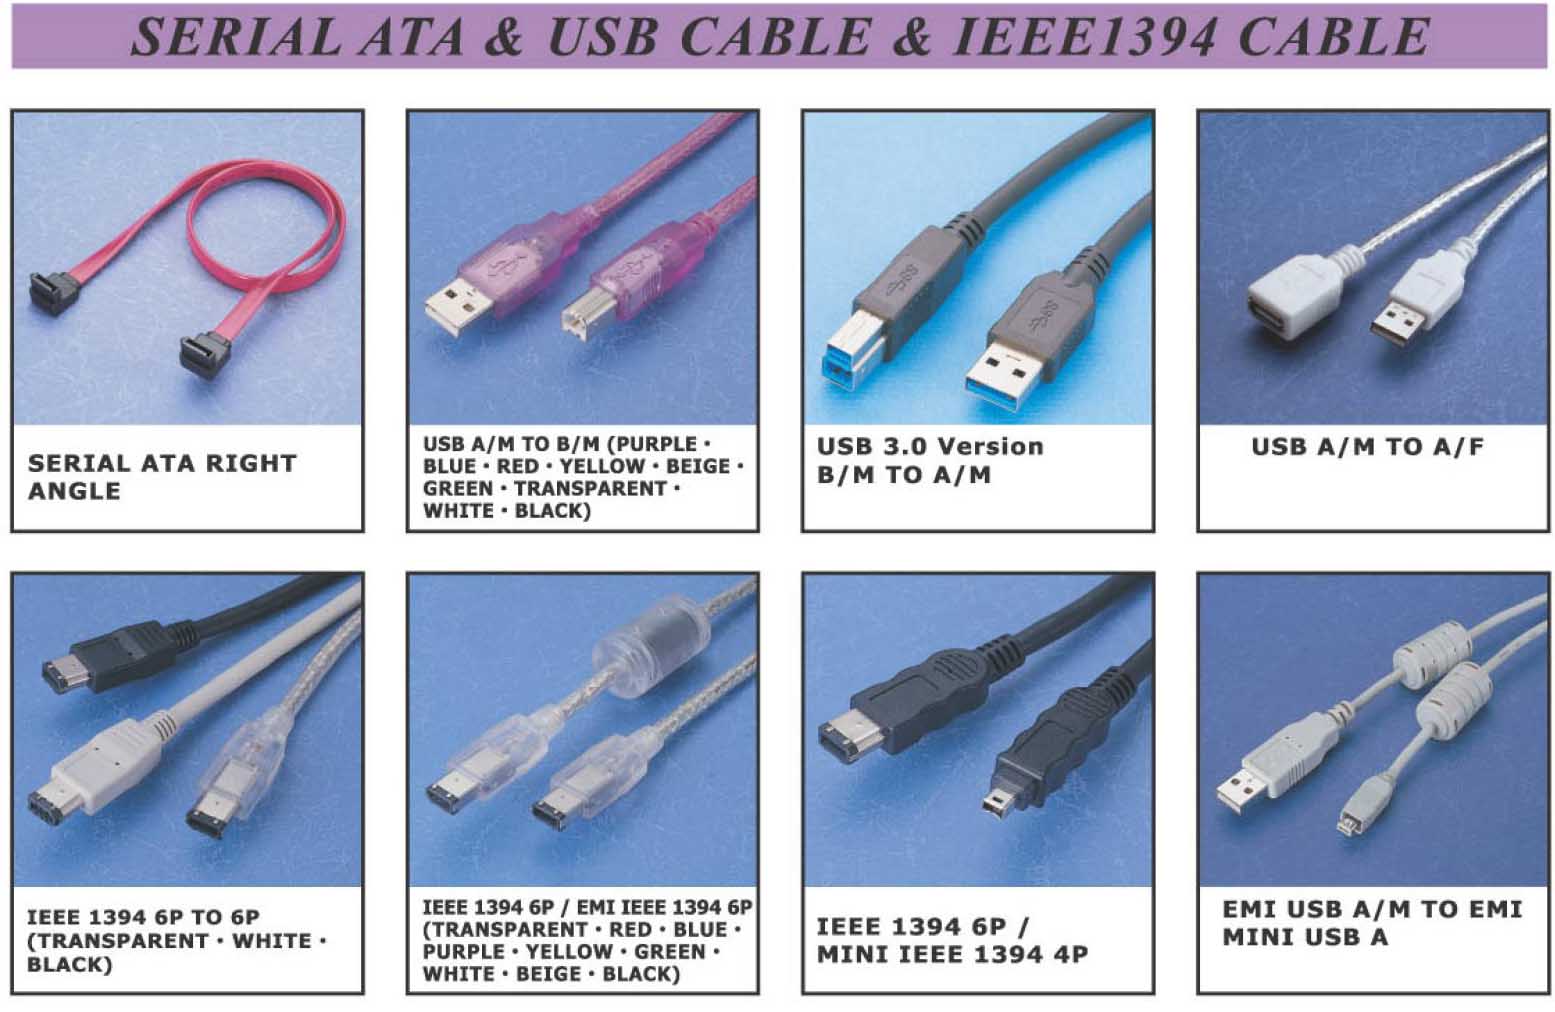 Connector, CableAssembly, WireHarness, PowerBank, WebCam,Serial Cable